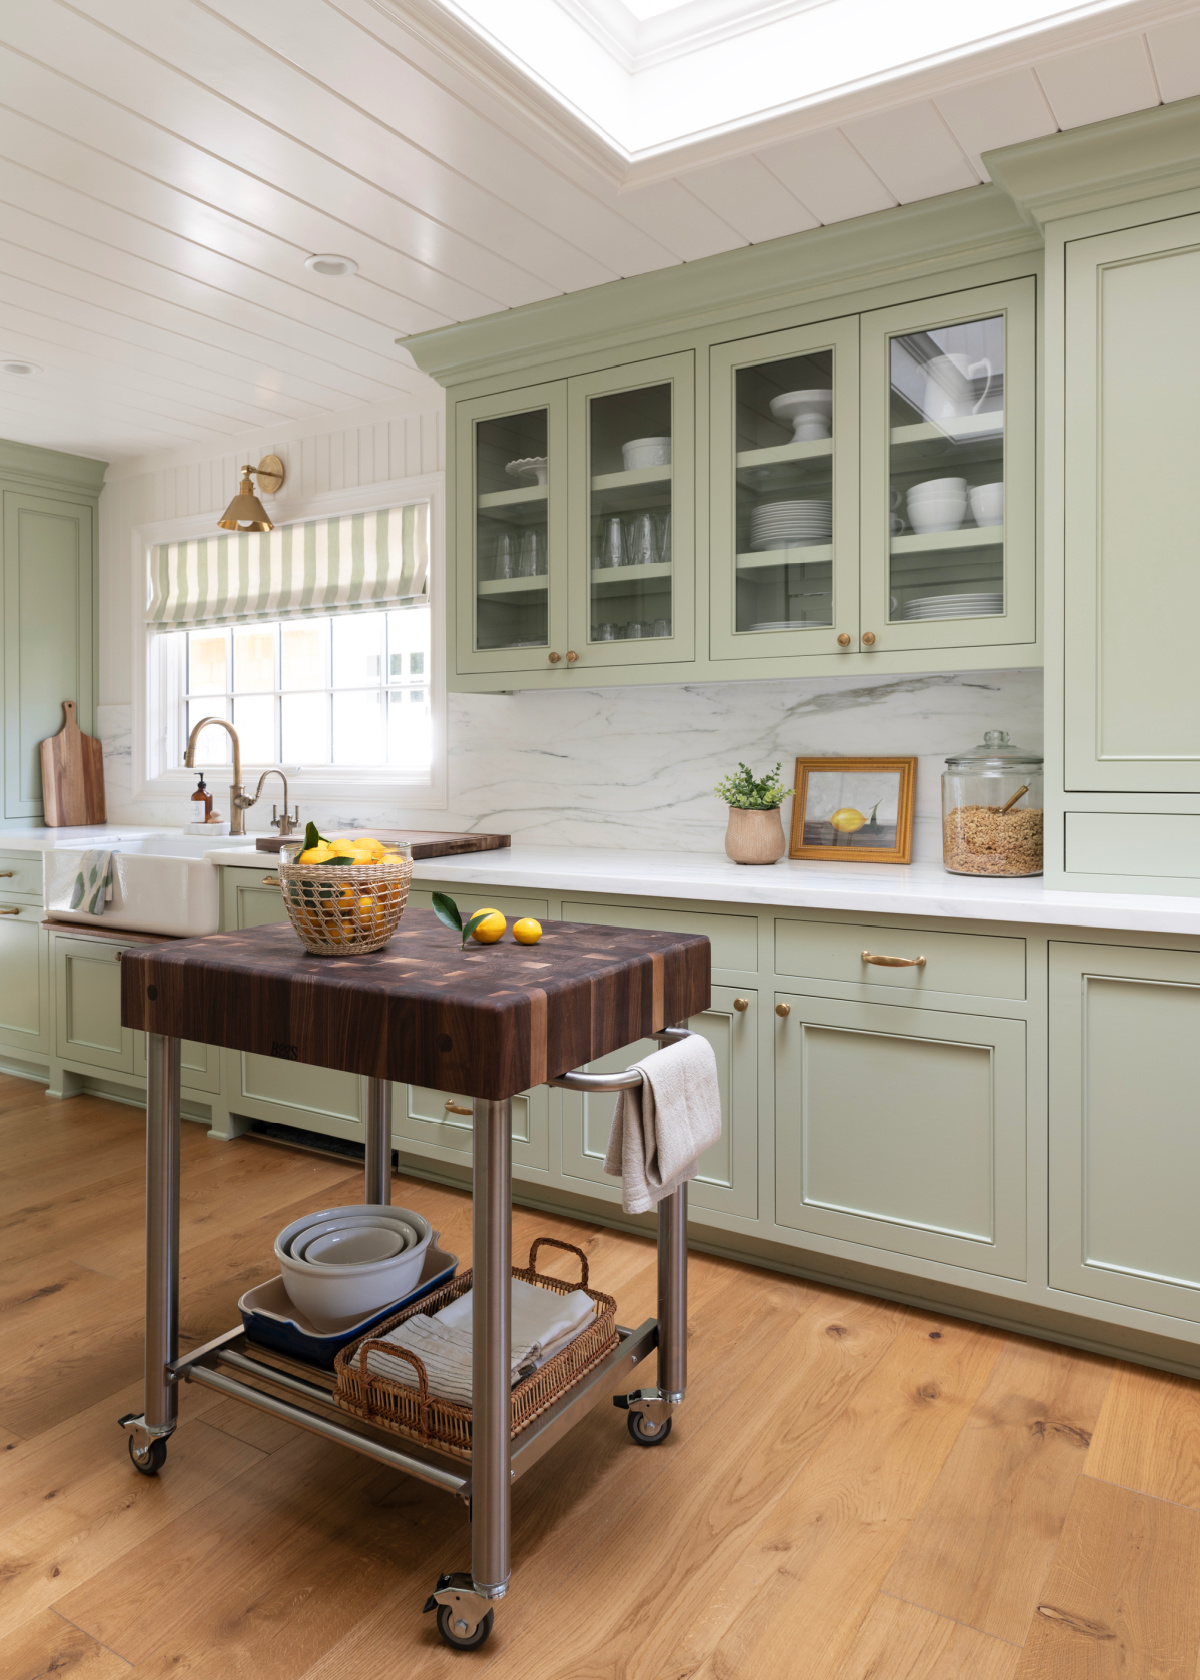 Butcher Block rolling island in kitchen with green cabinetry and glass front uppers.